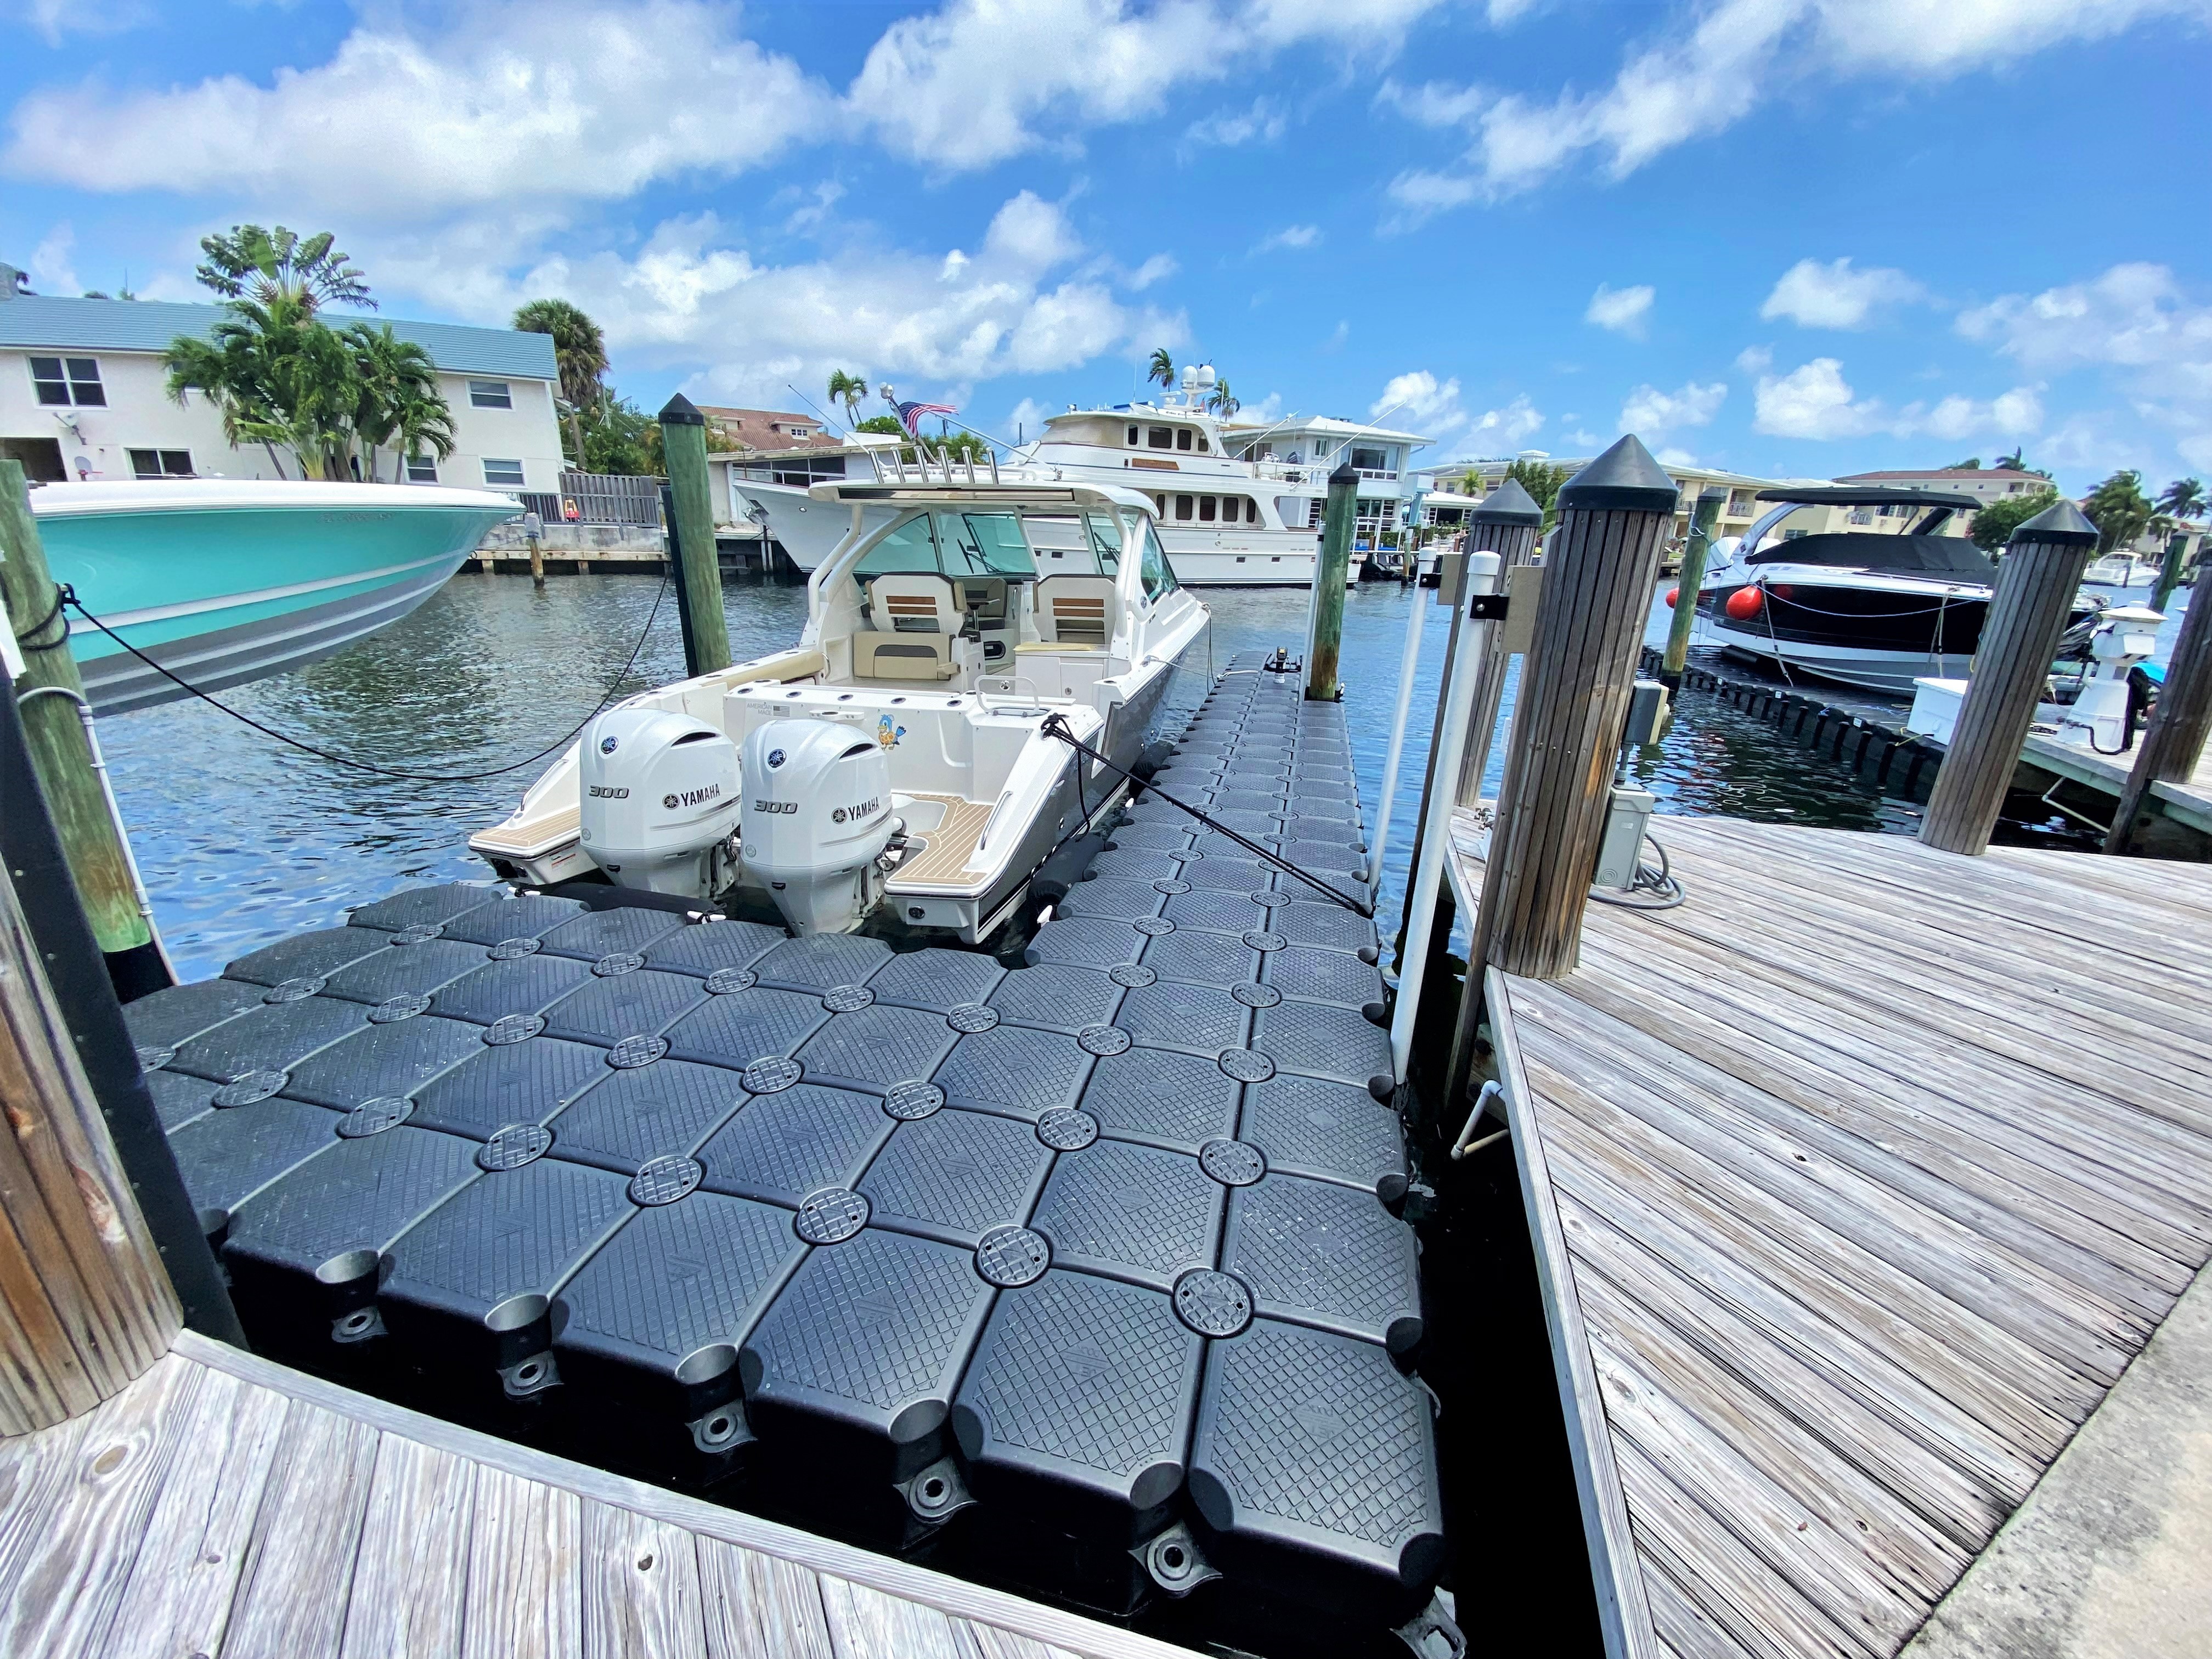 How to Keep Your Floating Walkway Looking Safe